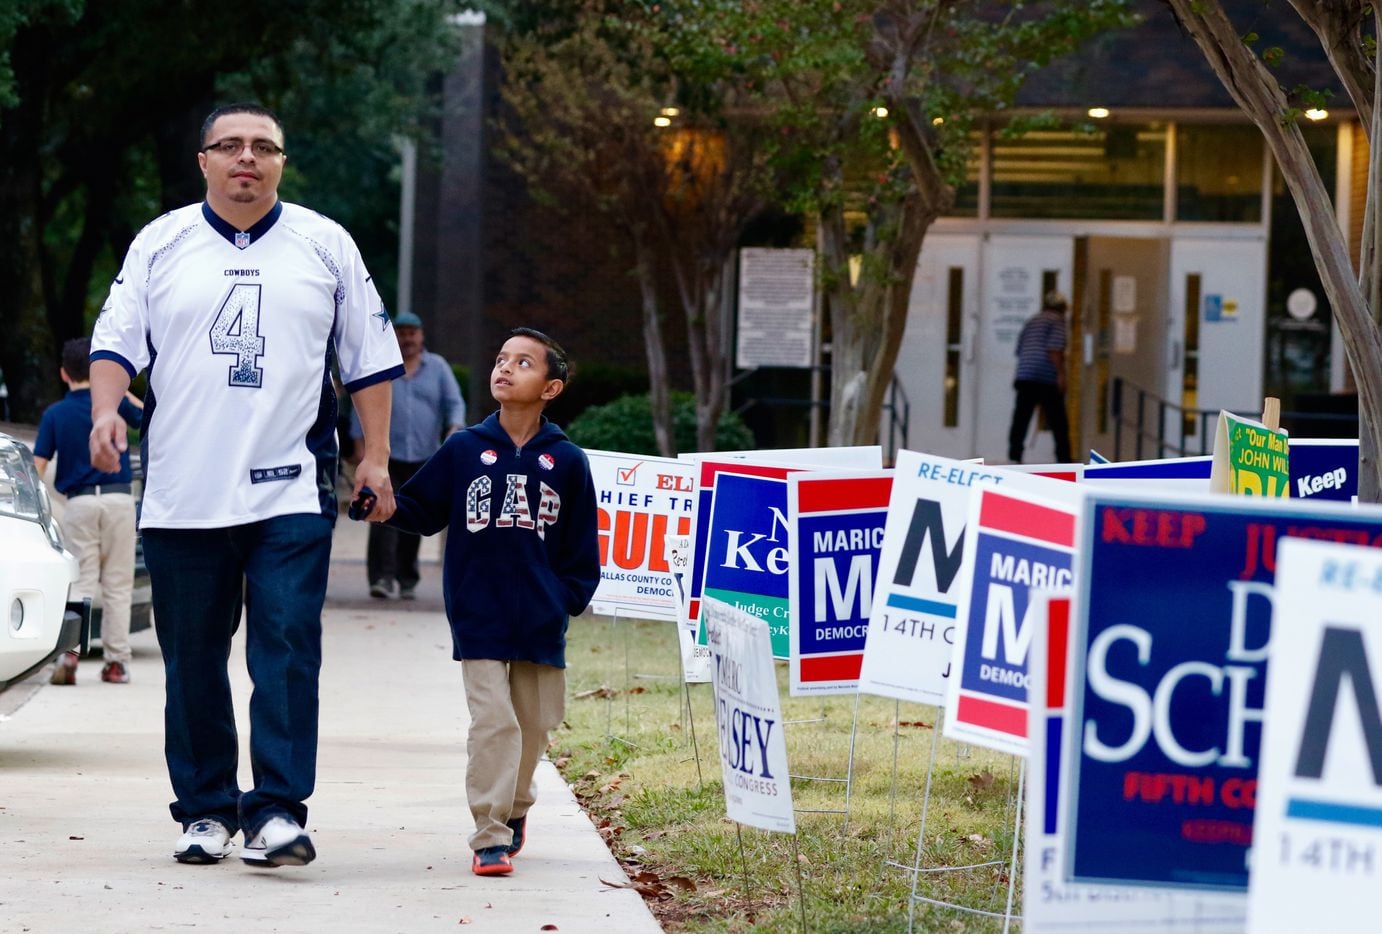 Sergio Cruz, left, with his son Nathan, 8, walk back to their car after Nathan watched his father vote early at the Dallas County Government Center, Precinct 5, on Beckley Ave and Twelfth St in Oak Cliff on Friday, November 4, 2016.